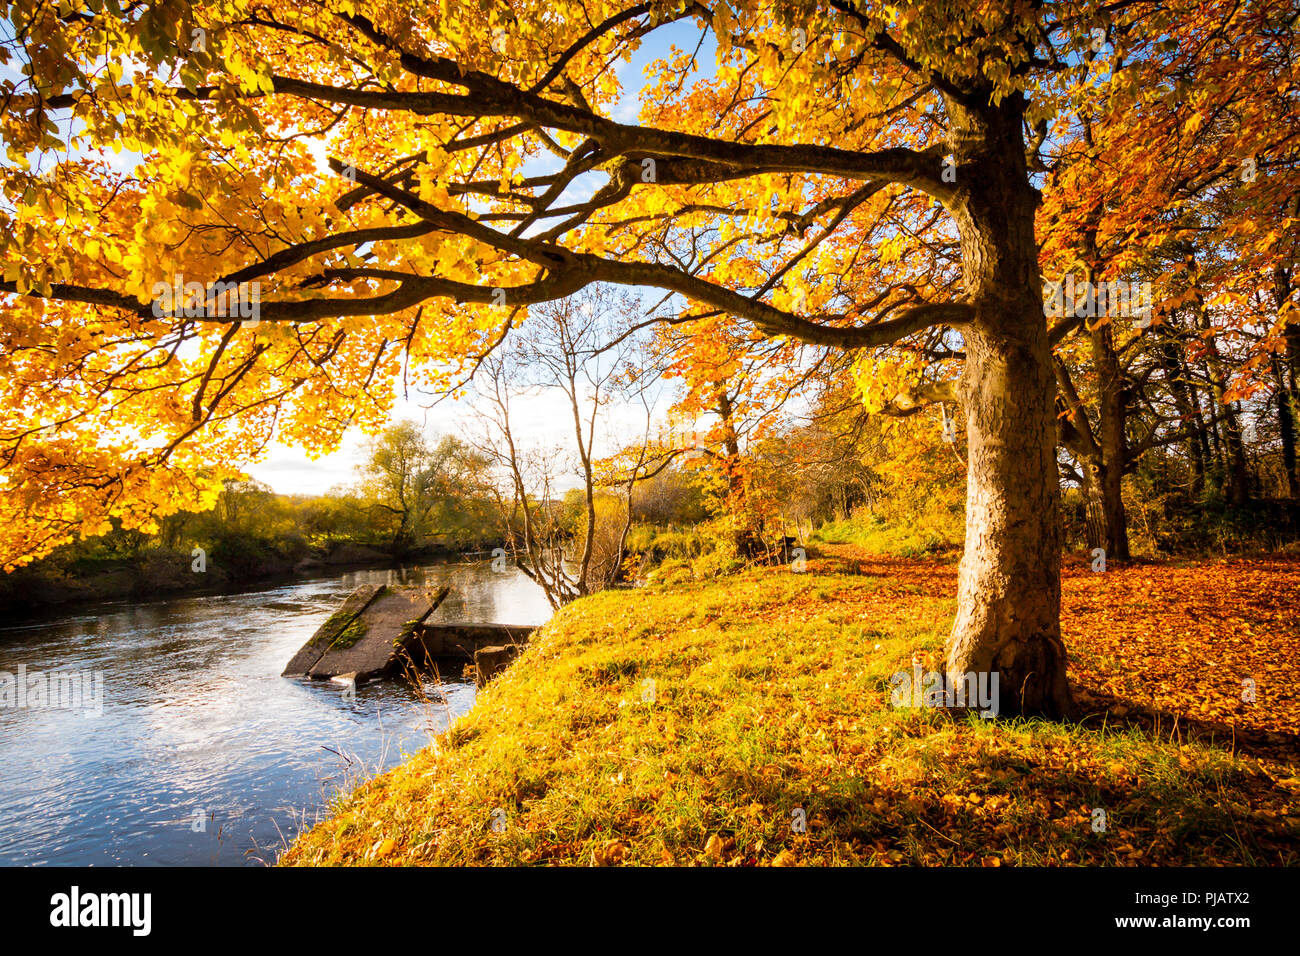 Beautiful, golden autumn scenery with trees and golden leaves in the sunshine in Scotland Stock Photo